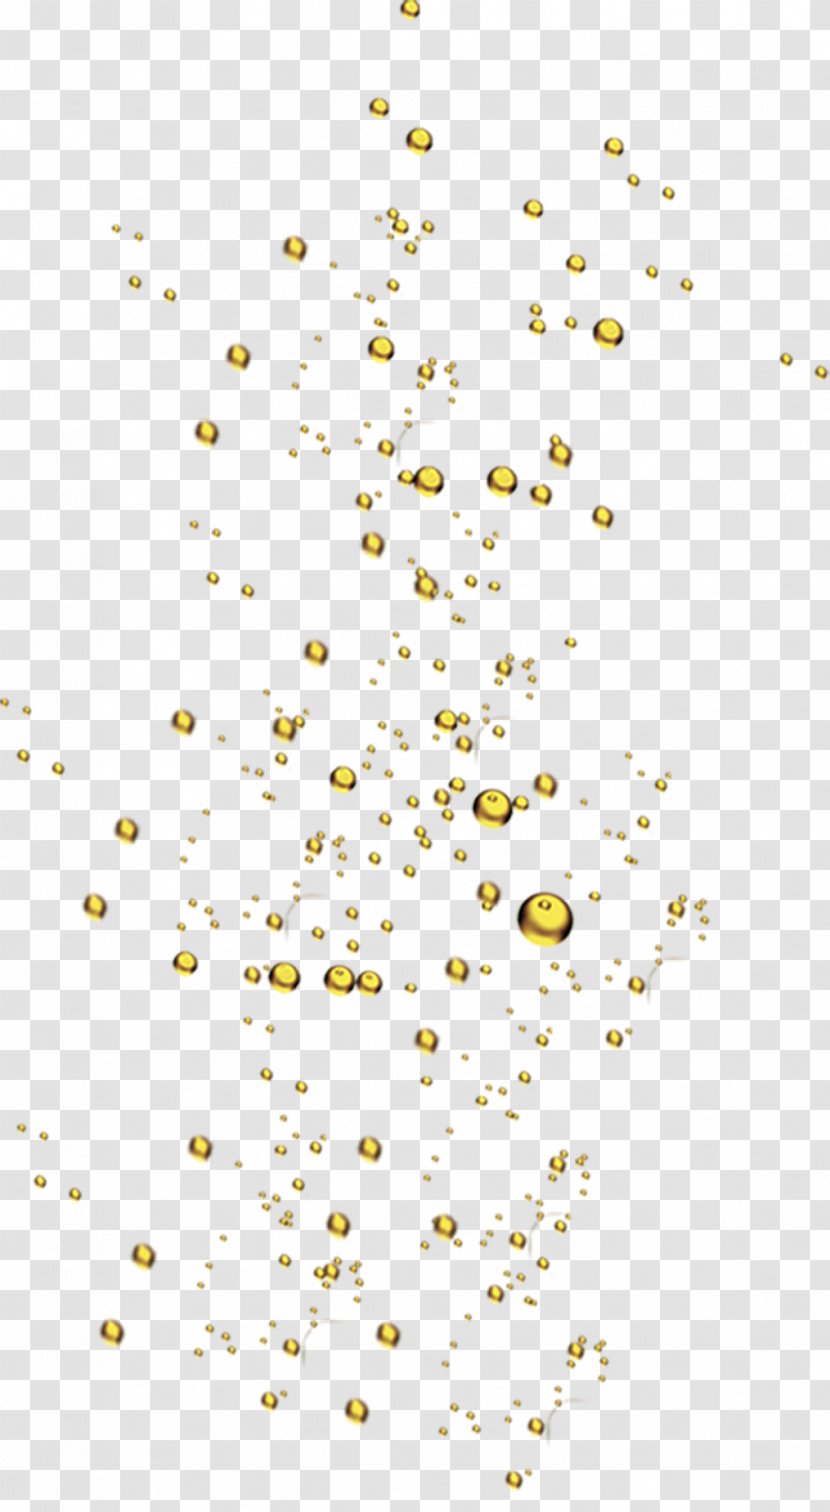 Yellow Drop Paint - Gold - Droplets Floating Material Transparent PNG